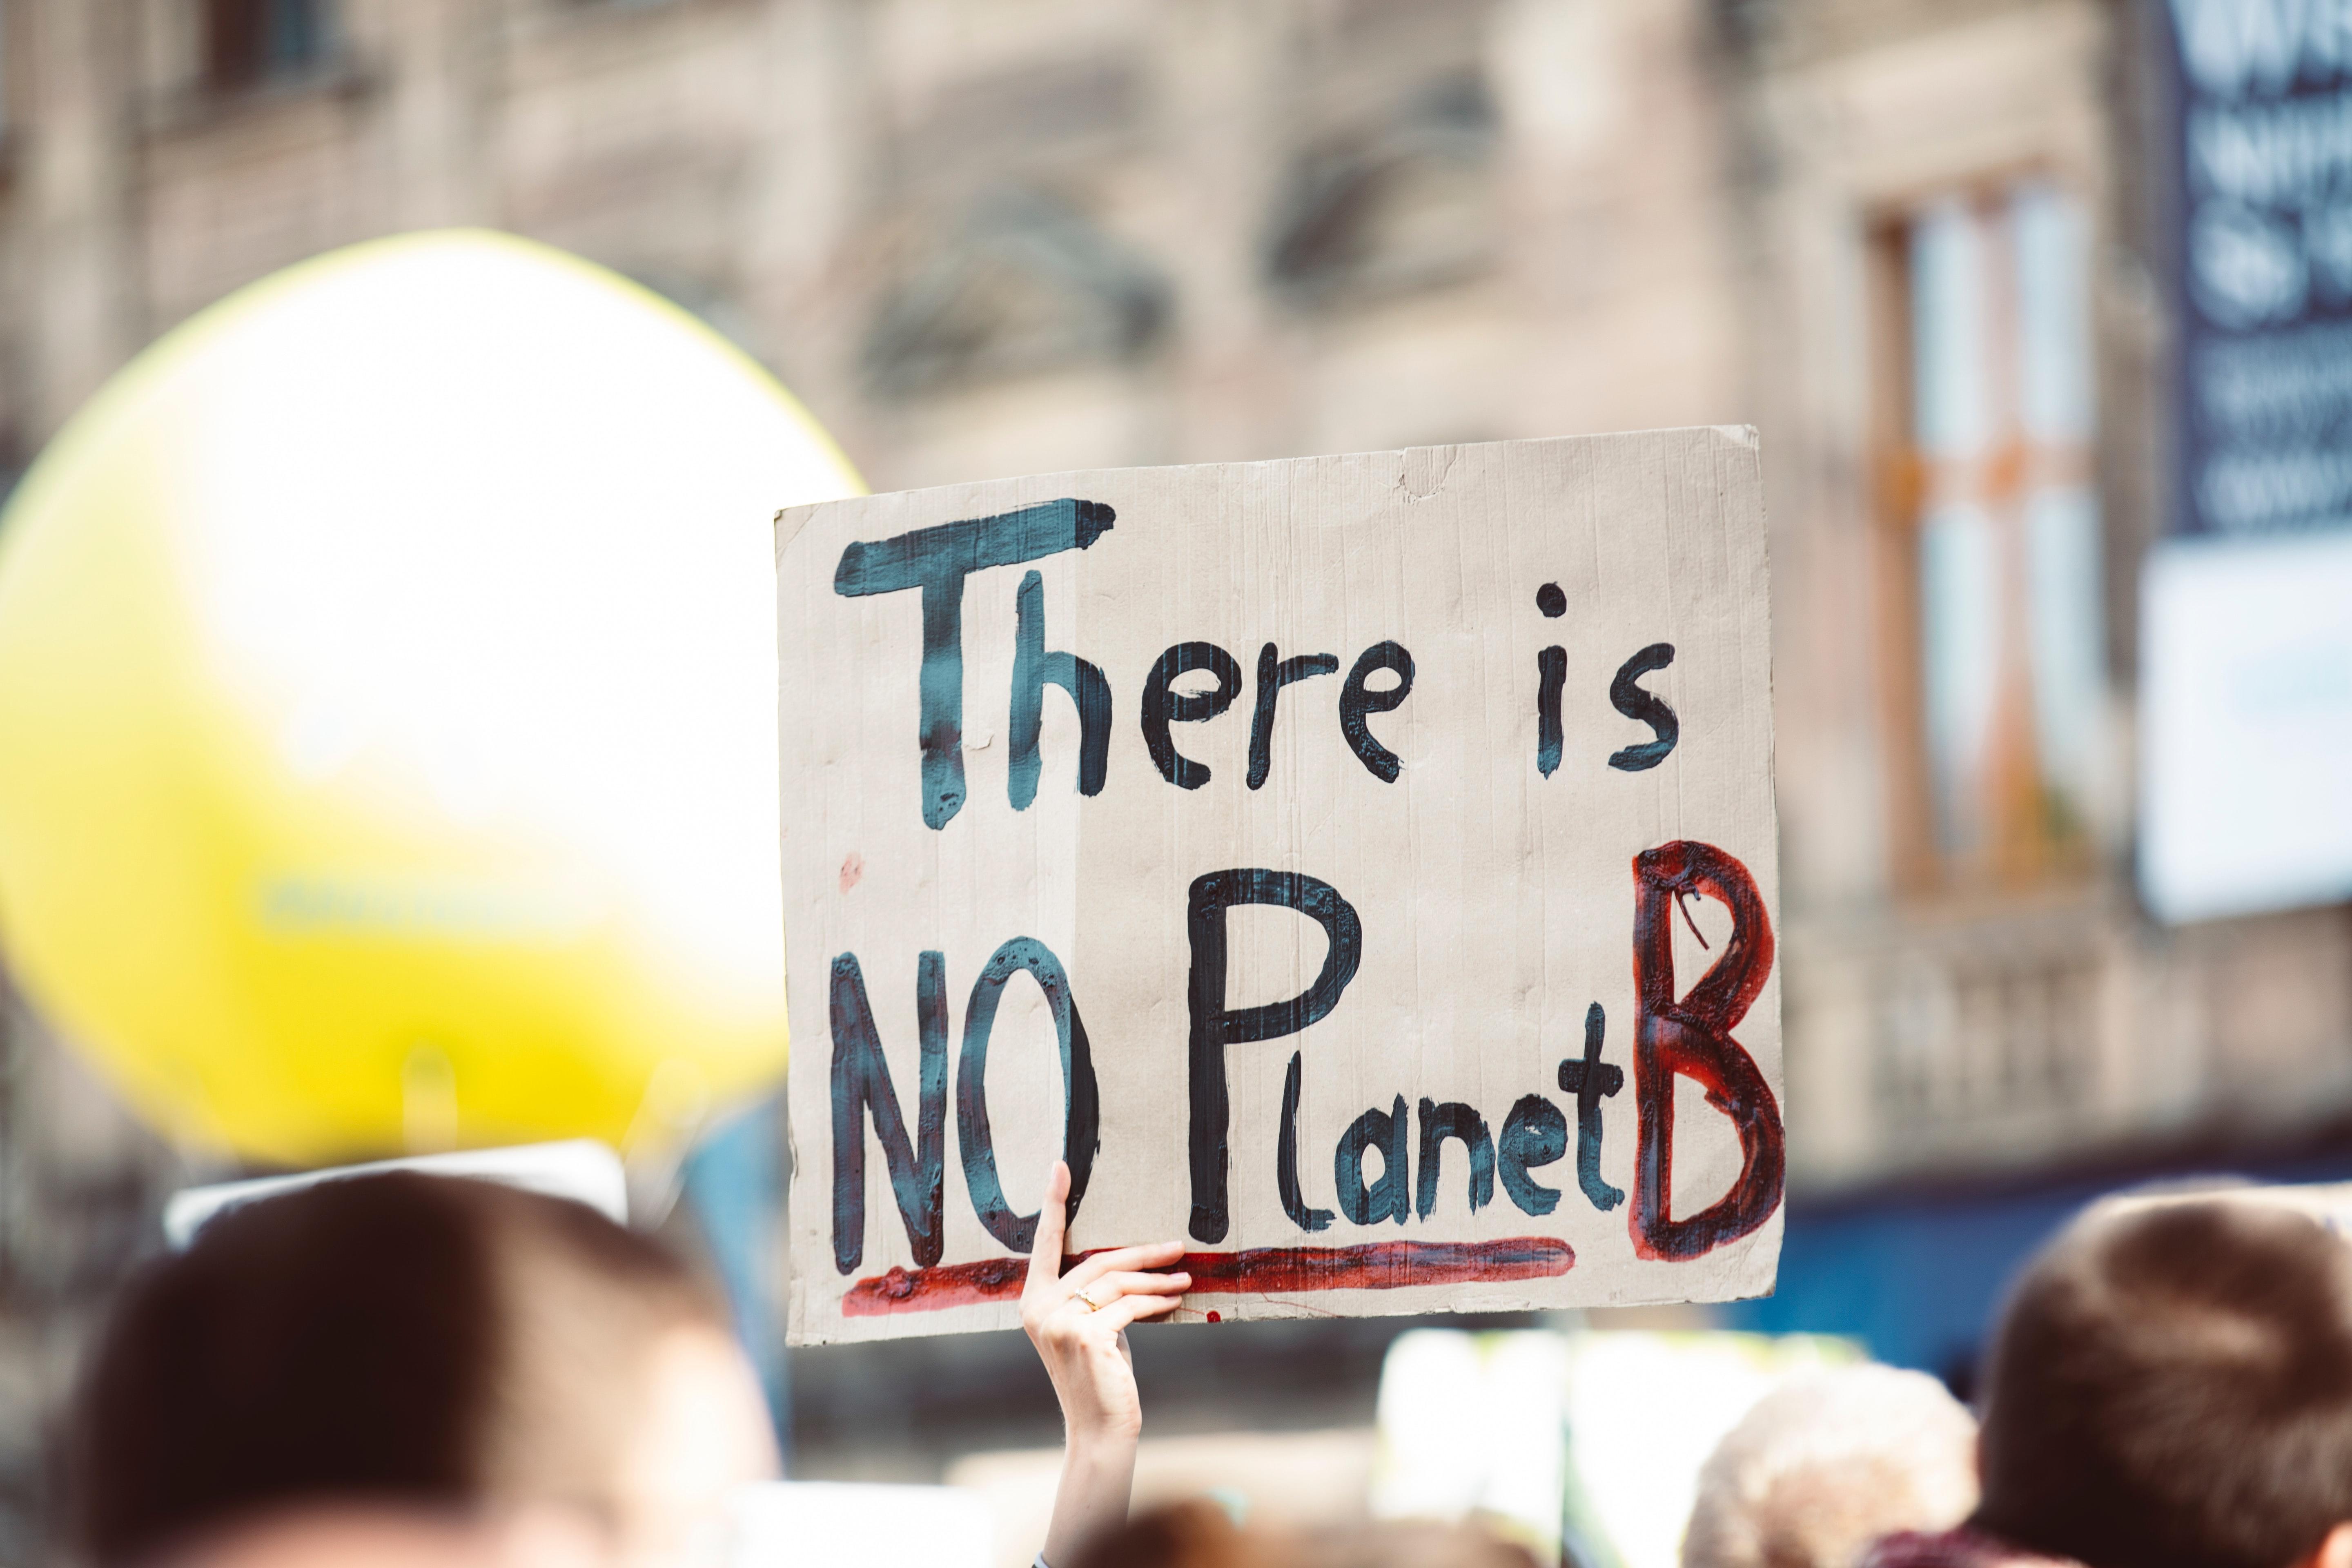 Hand holding up a sign saying "there is no planet b"